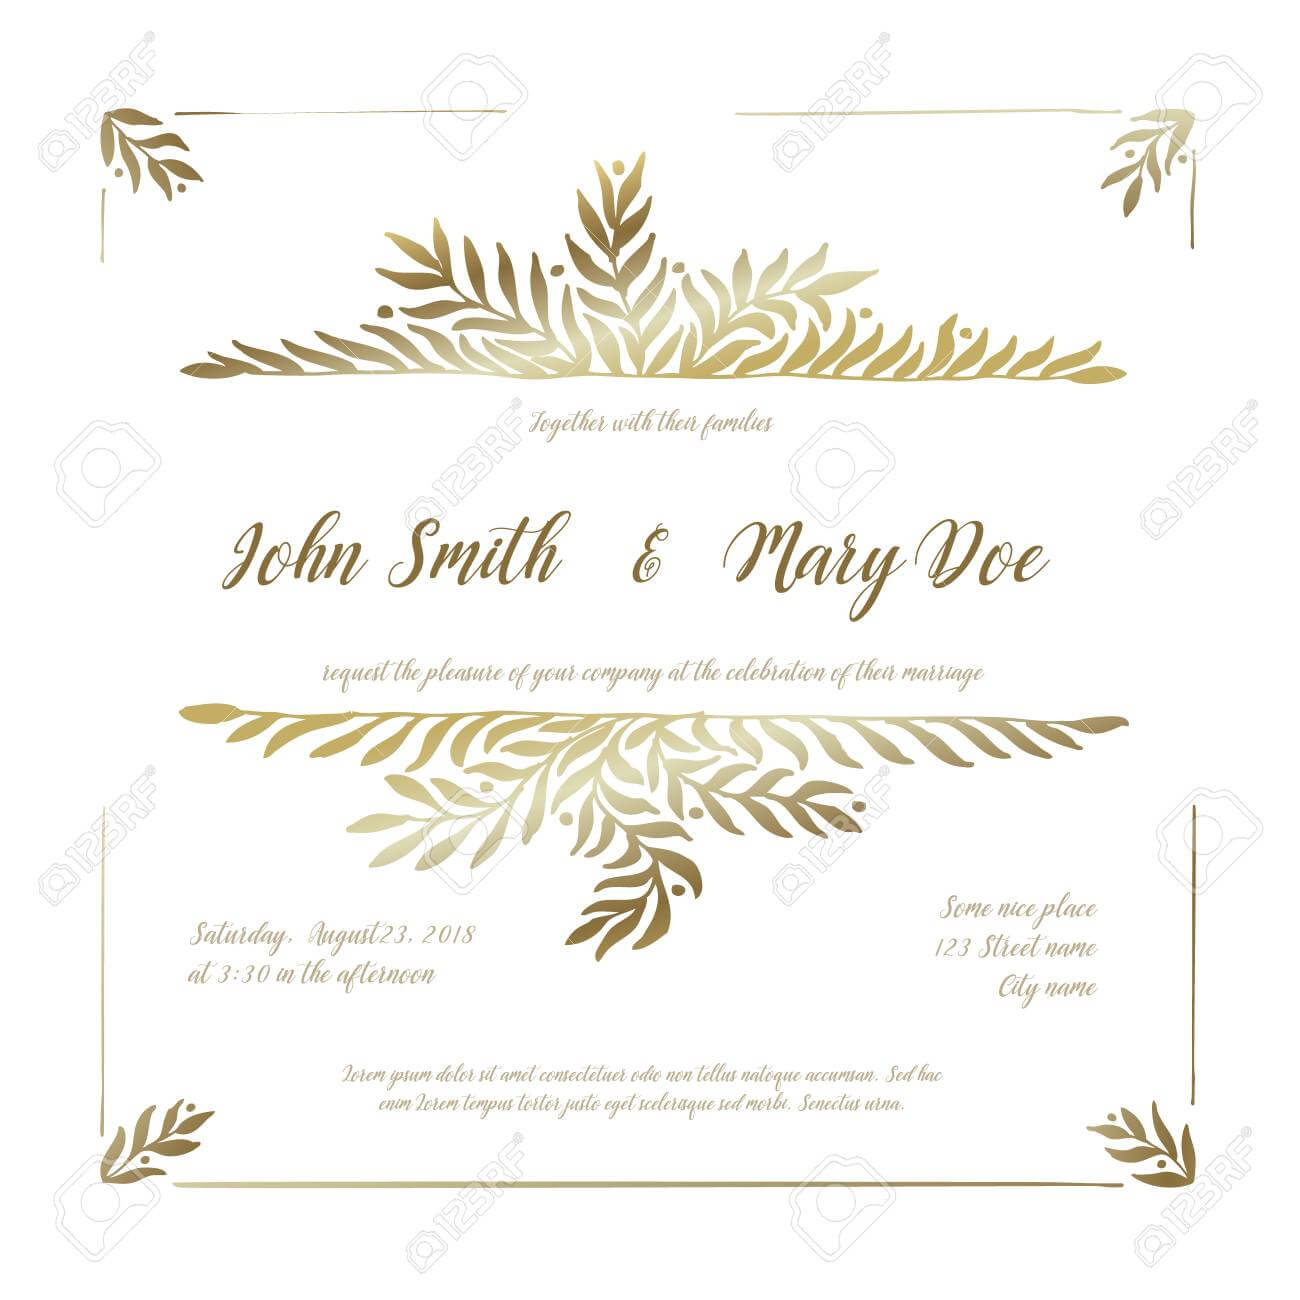 Vector Wedding Invitation Card Template With Golden Floral Elements With Regard To Invitation Cards Templates For Marriage